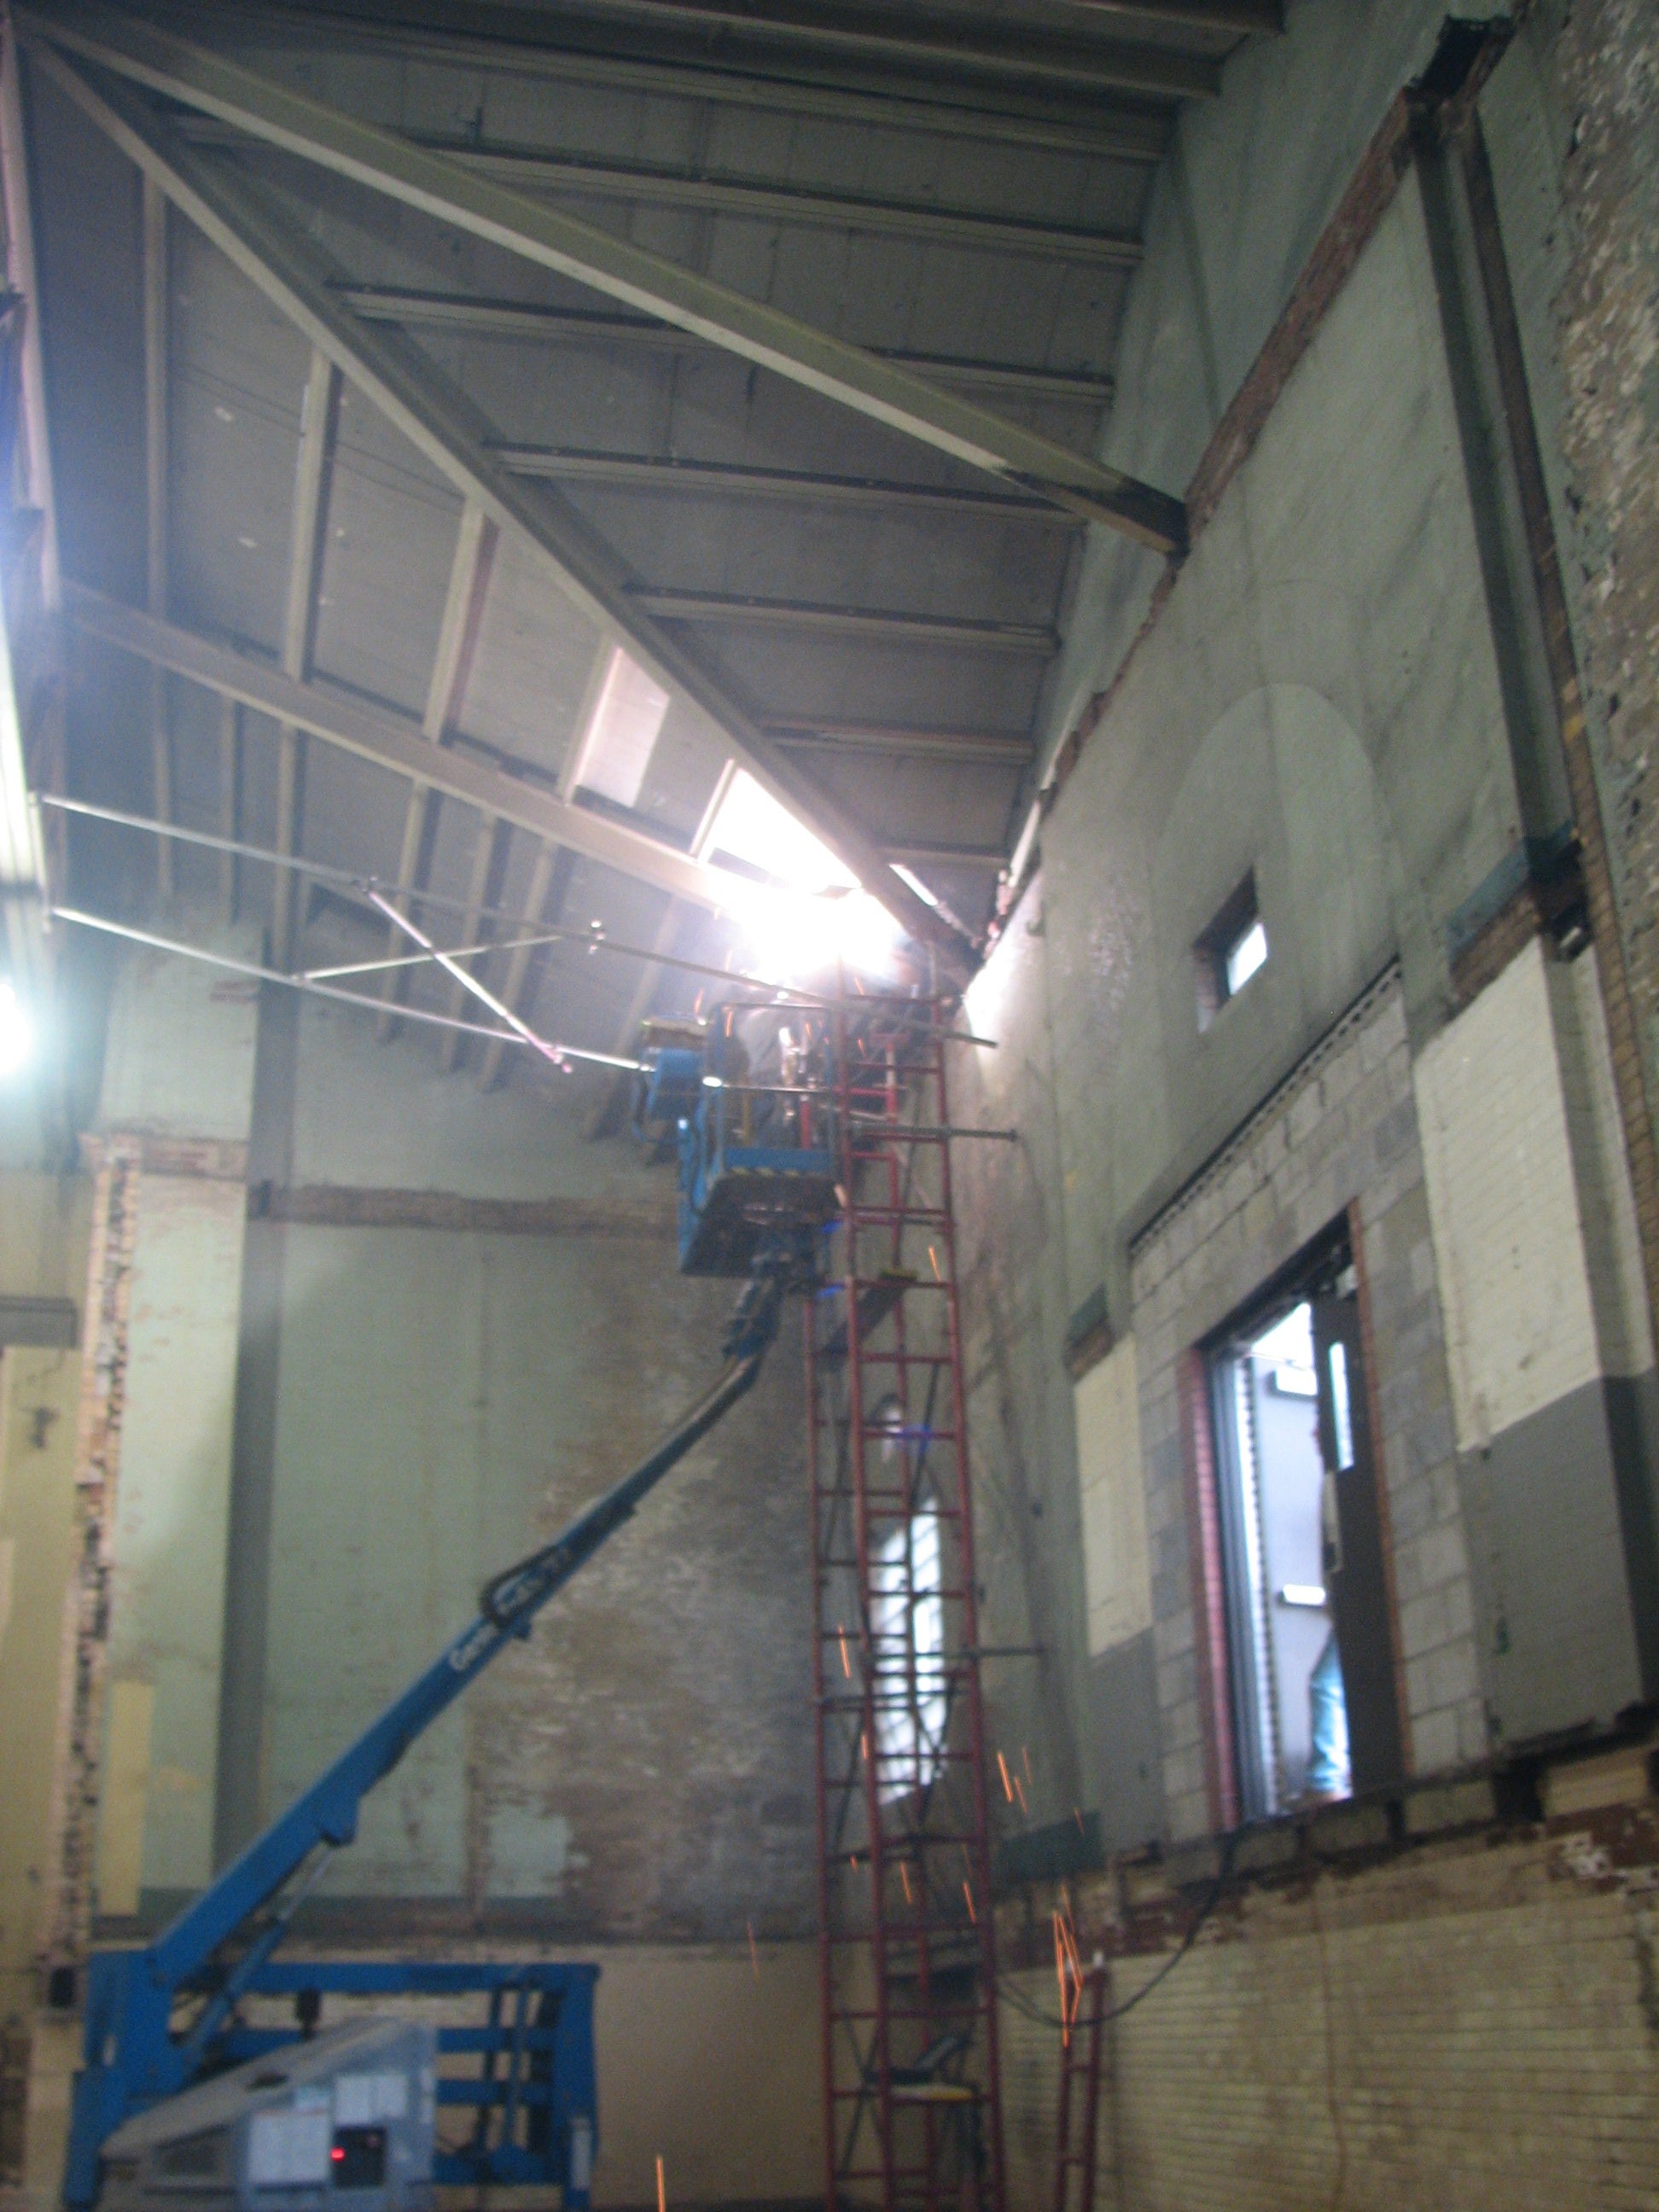 Work has begun inside the old pumping station